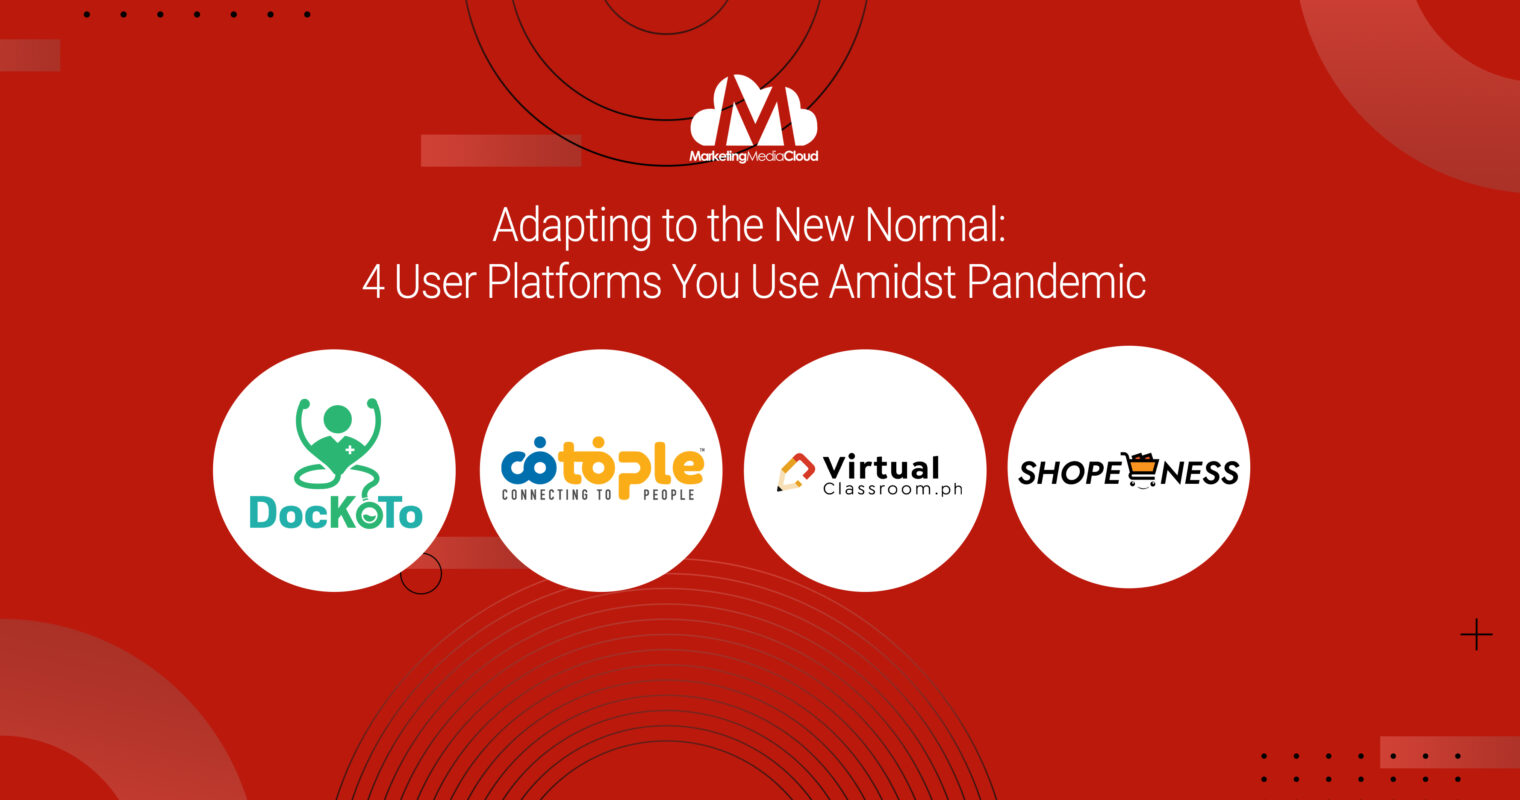 User Platforms You Can Use to Adapt to the New Normal